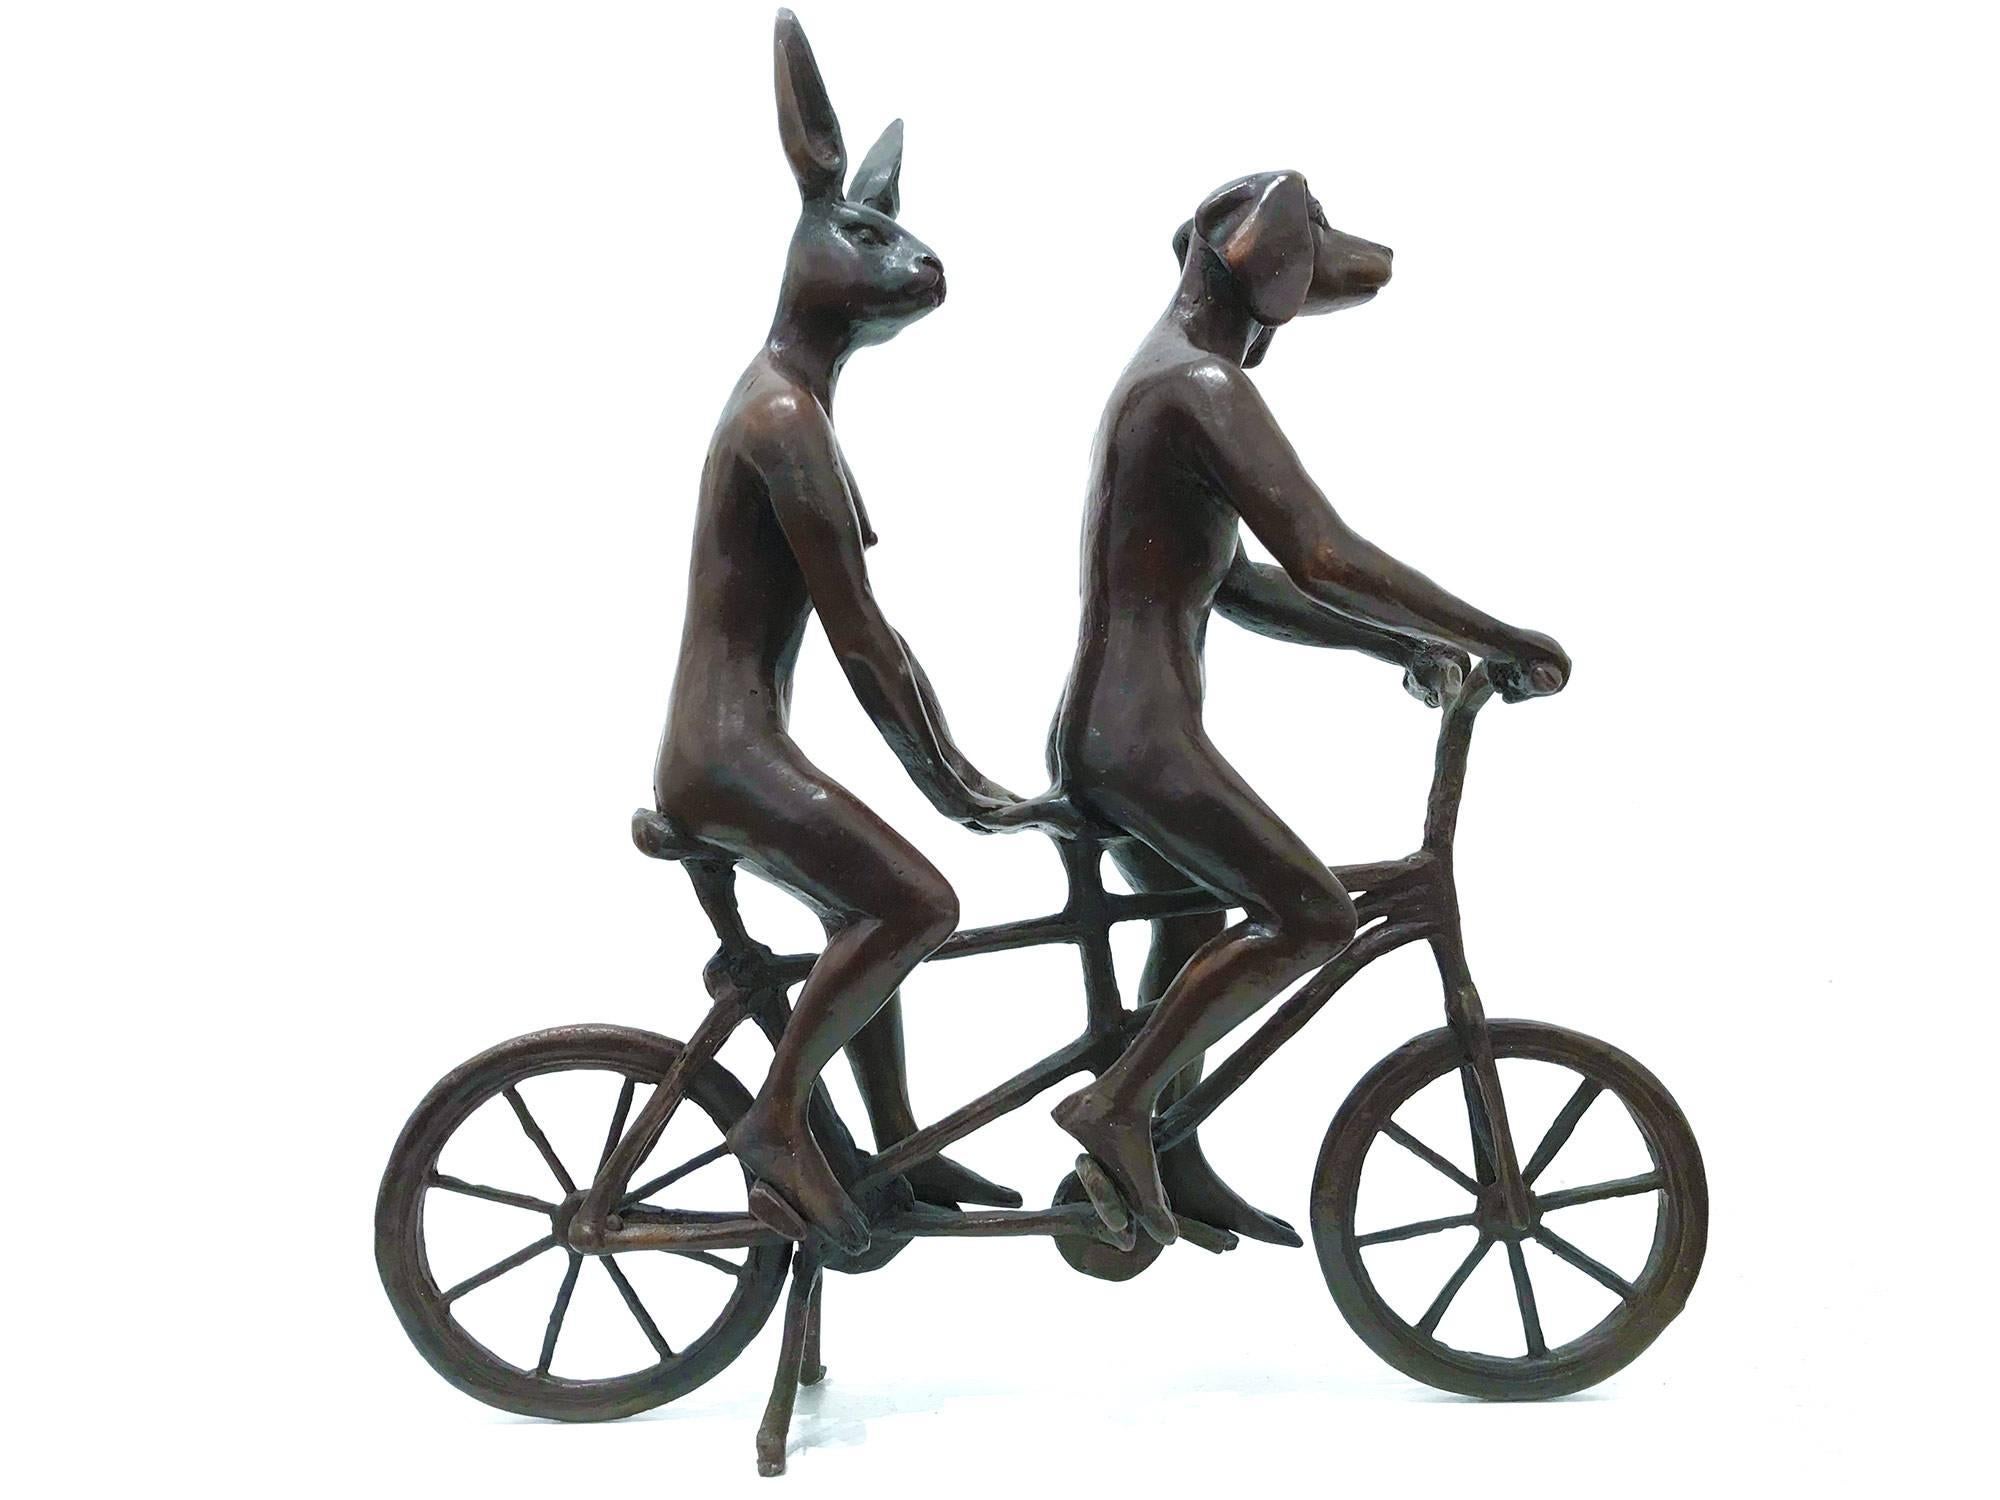 A whimsical yet very strong piece depicting the Rabbit and Weim from Gillie and Marc's iconic figures of the Dog/Bunny Human Hybrid, which has picked up much esteem across the globe. Here we find these characters riding together on a bicycle through